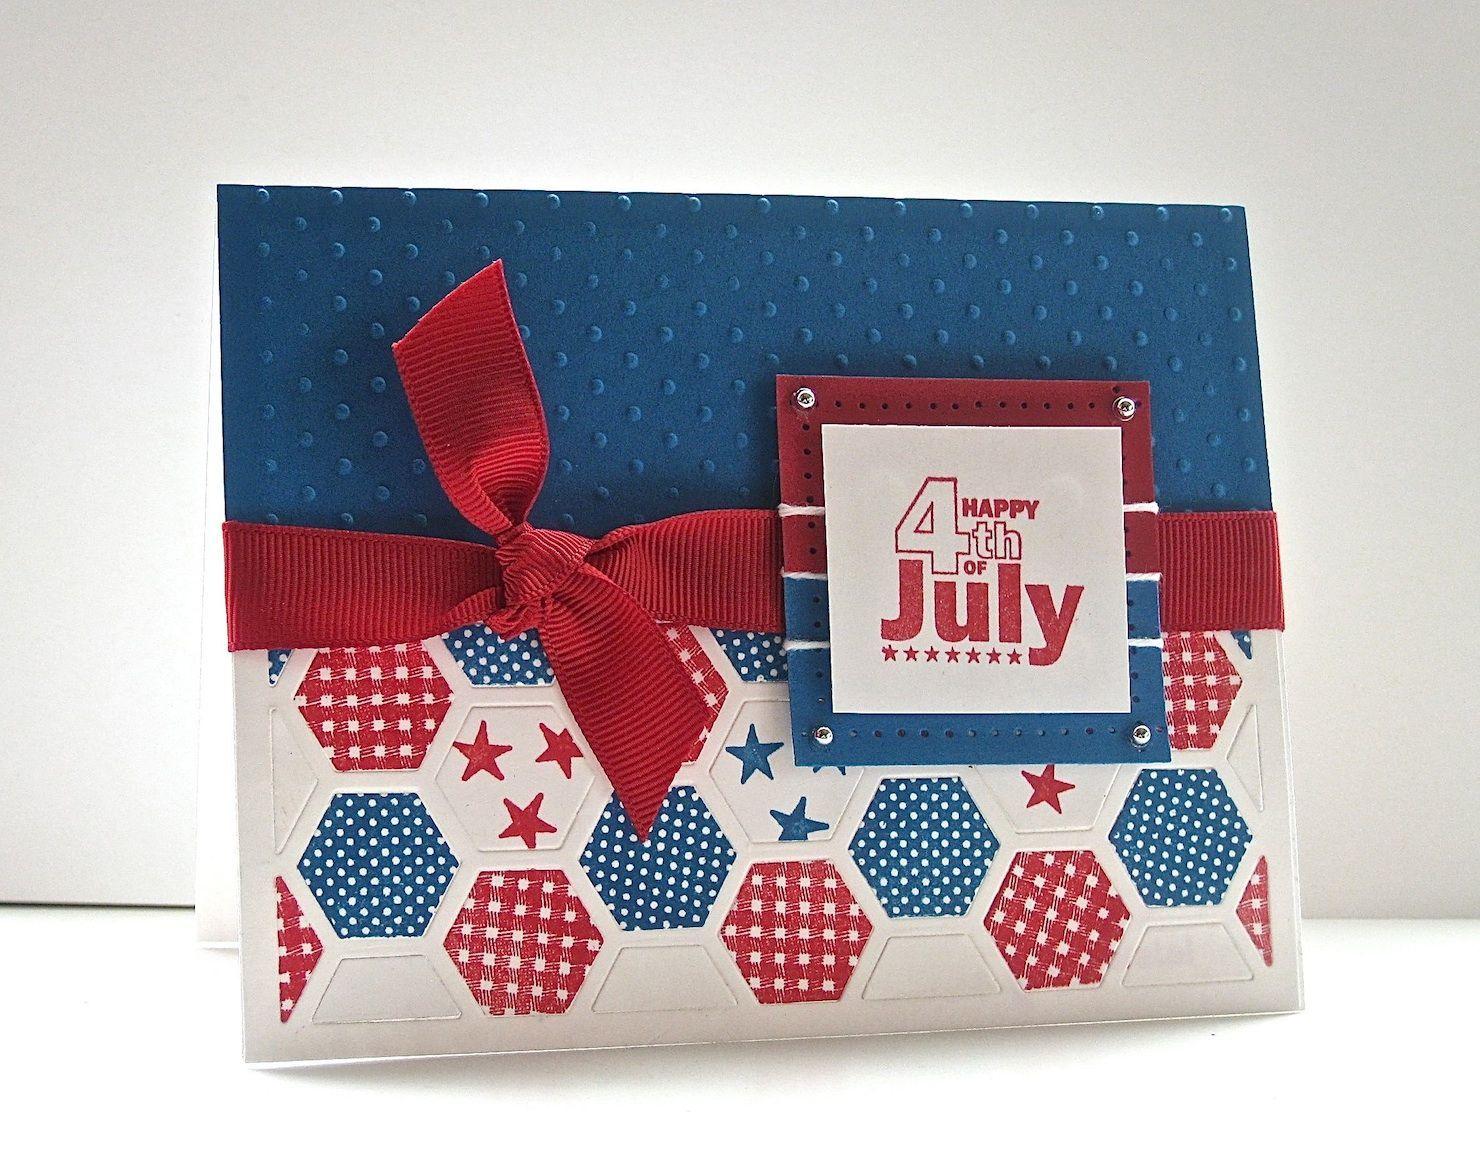 White and Red Filled Hexagon Logo - handmade 4th of July card .. red white and blue ... hexagon pattern ...